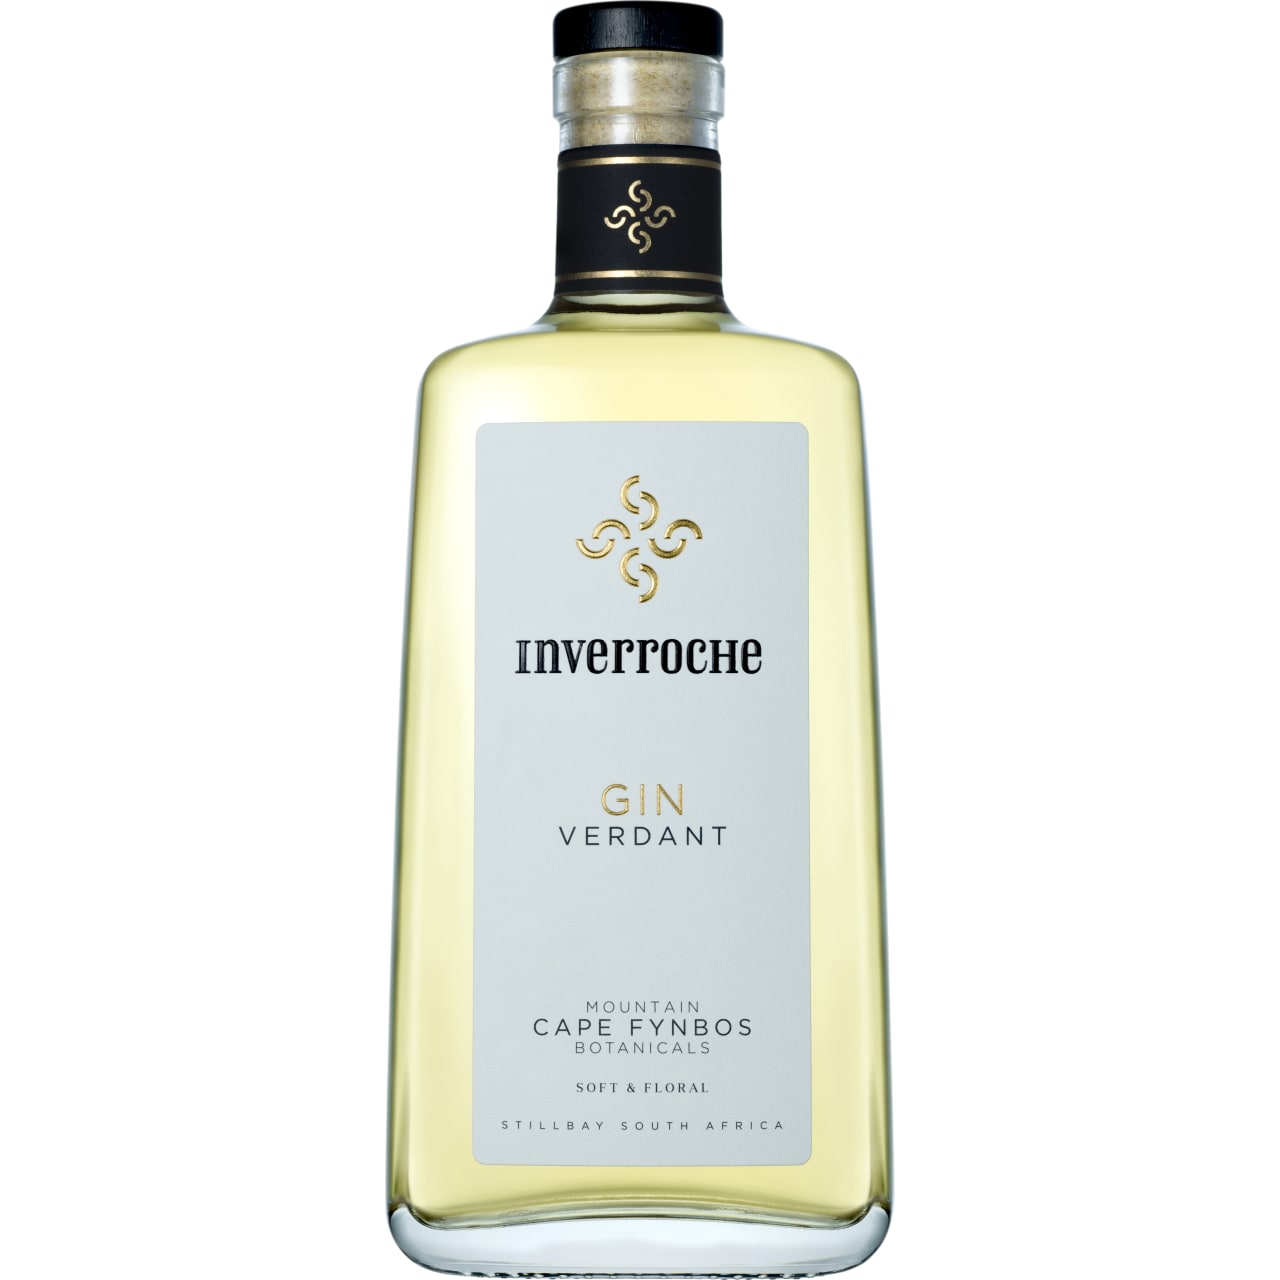 Inverroche Gin Verdant is floral and soft with a translucent golden-green hue. Delicate aromas reminiscent of elderflower and chamomile, lead to summer blooms, a touch of spice, subtle juniper, waxy lemon rind and alluring liquorice on the Palate.